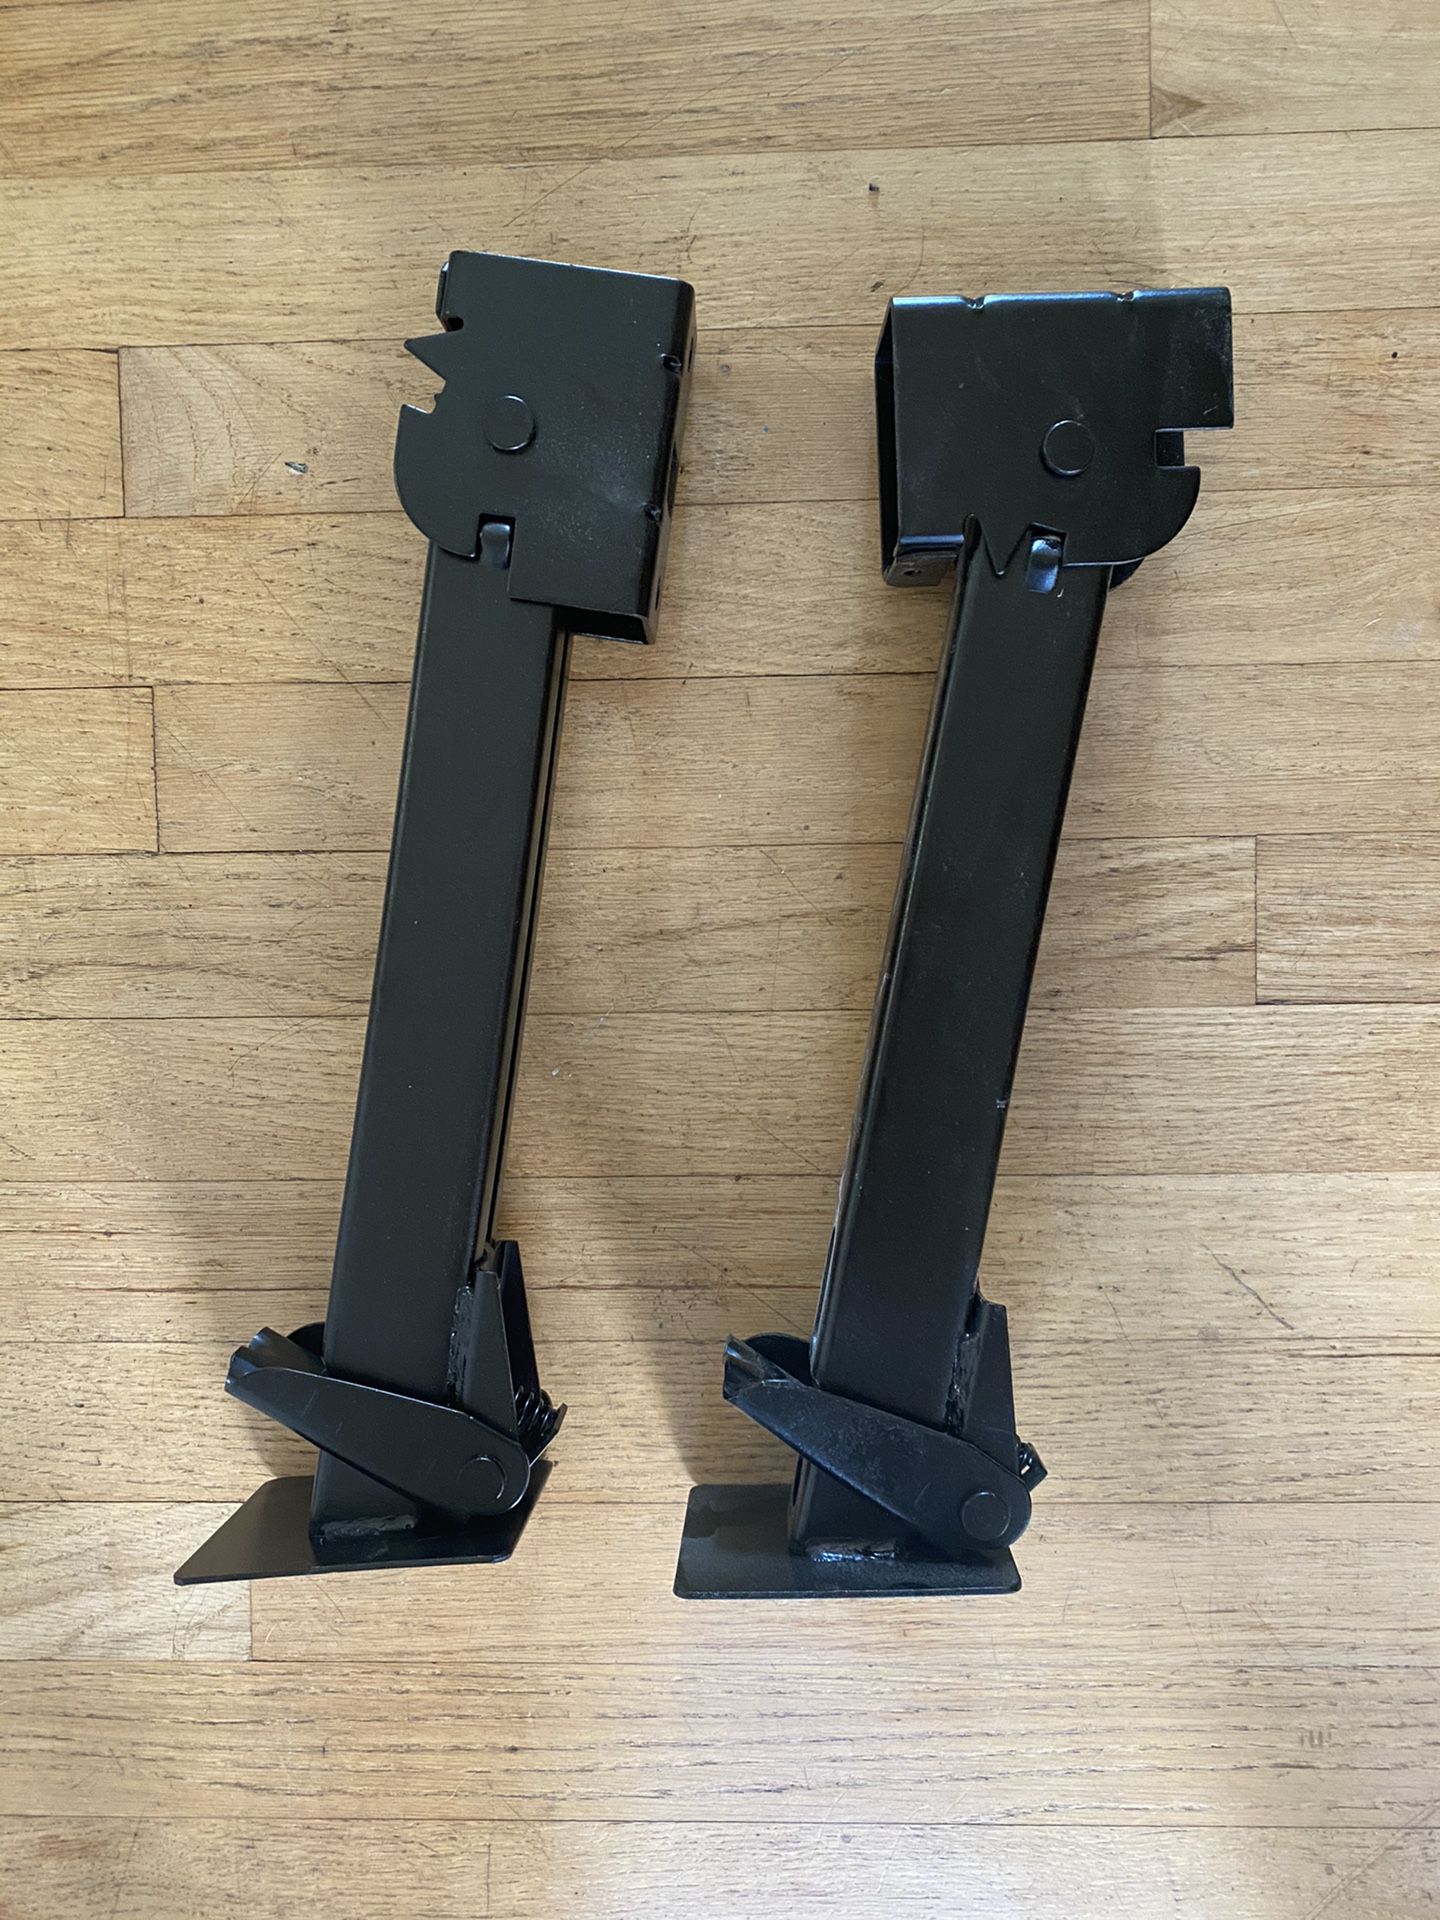 7” Rear stabilizers for RV- Brand new! 